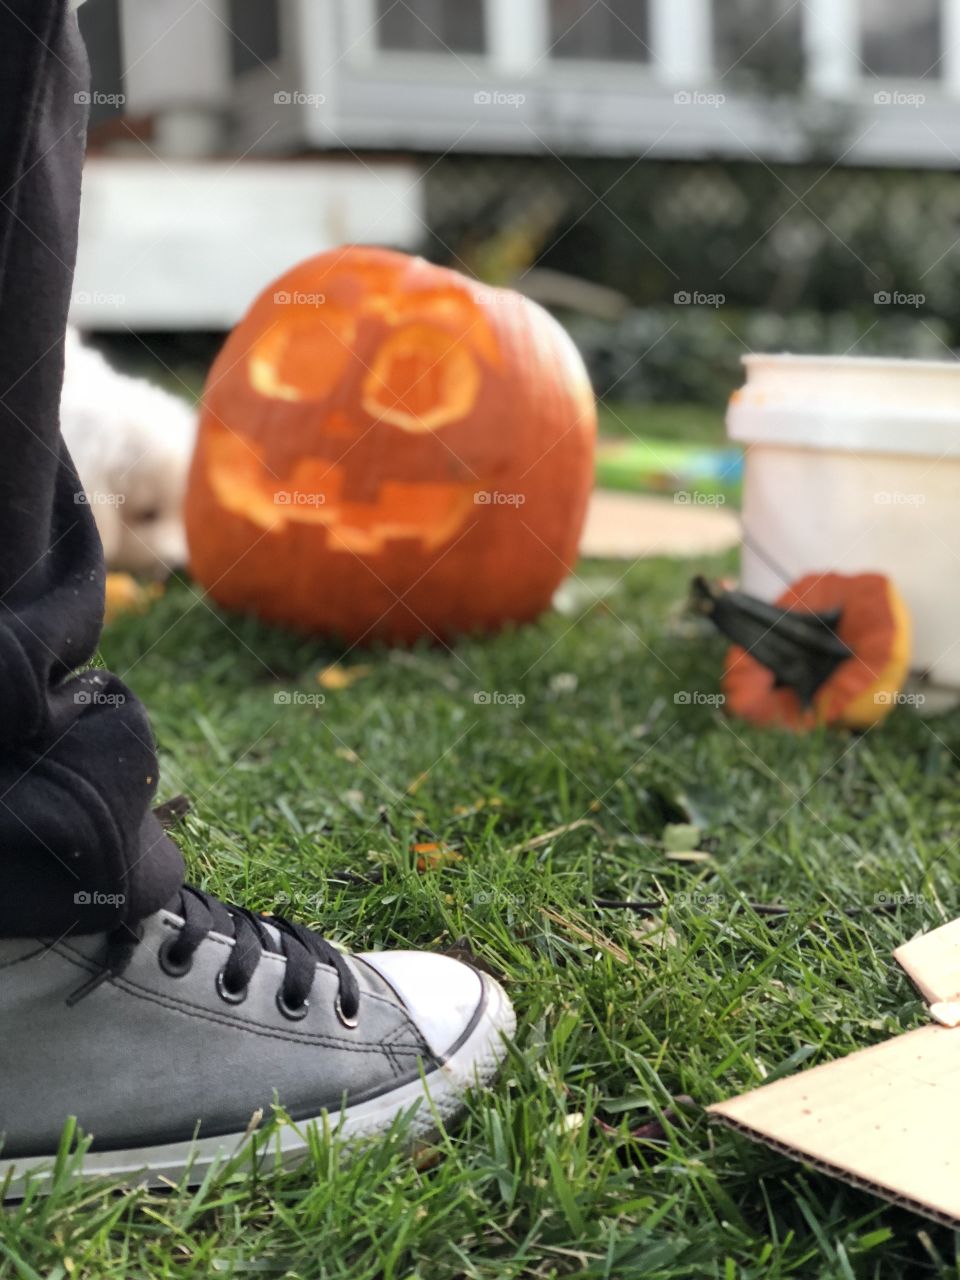 Carving pumpkins to create jack-o-lanterns for Halloween in Converse shoes - love my Chucks